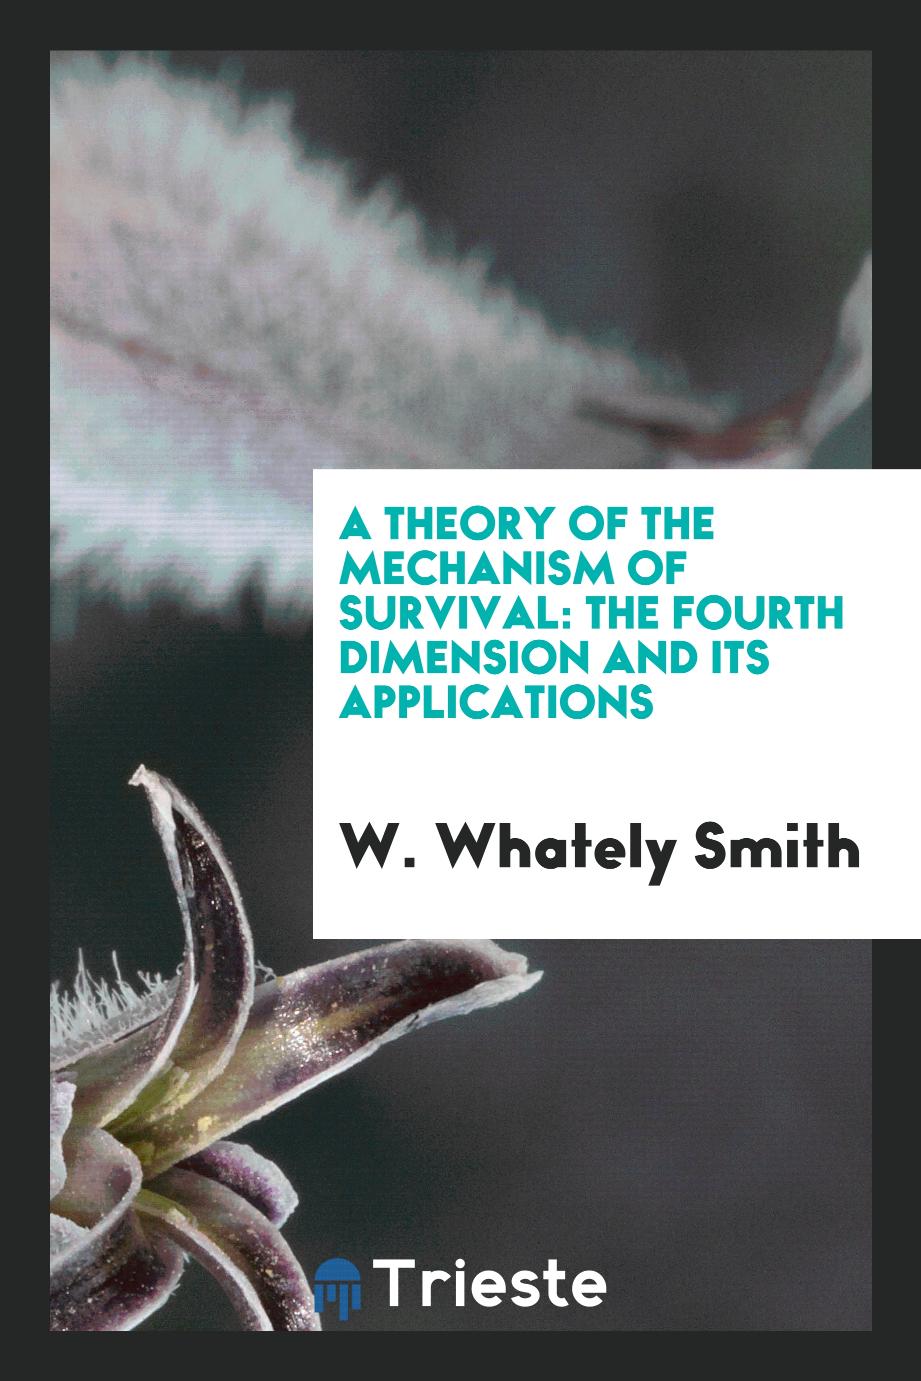 A theory of the mechanism of survival: the fourth dimension and its applications